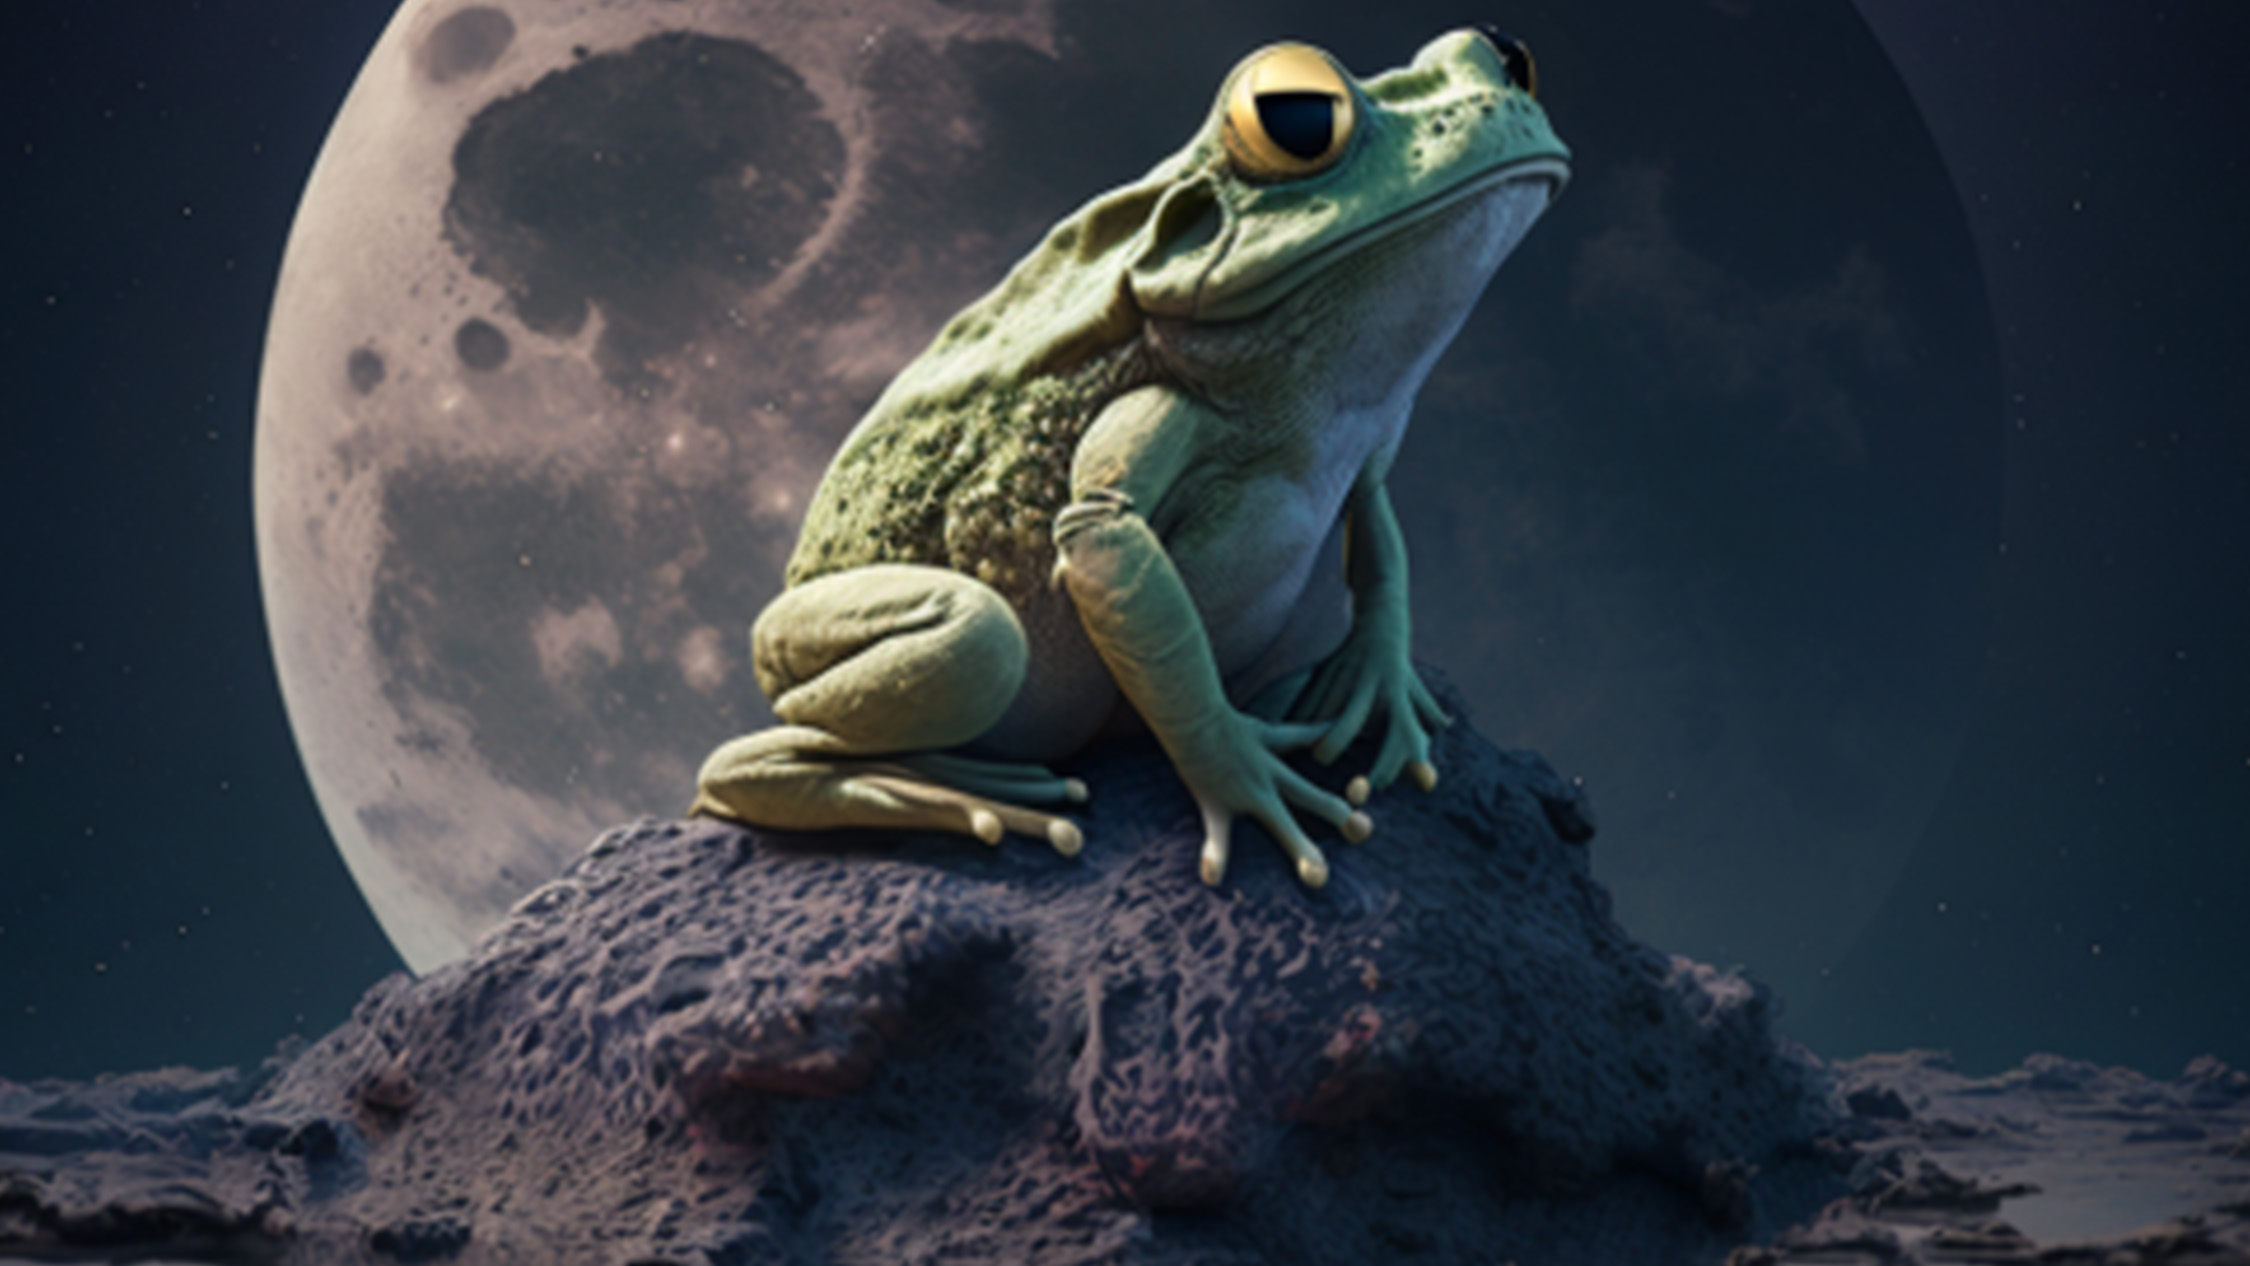 An image of a frog created by Midjourney